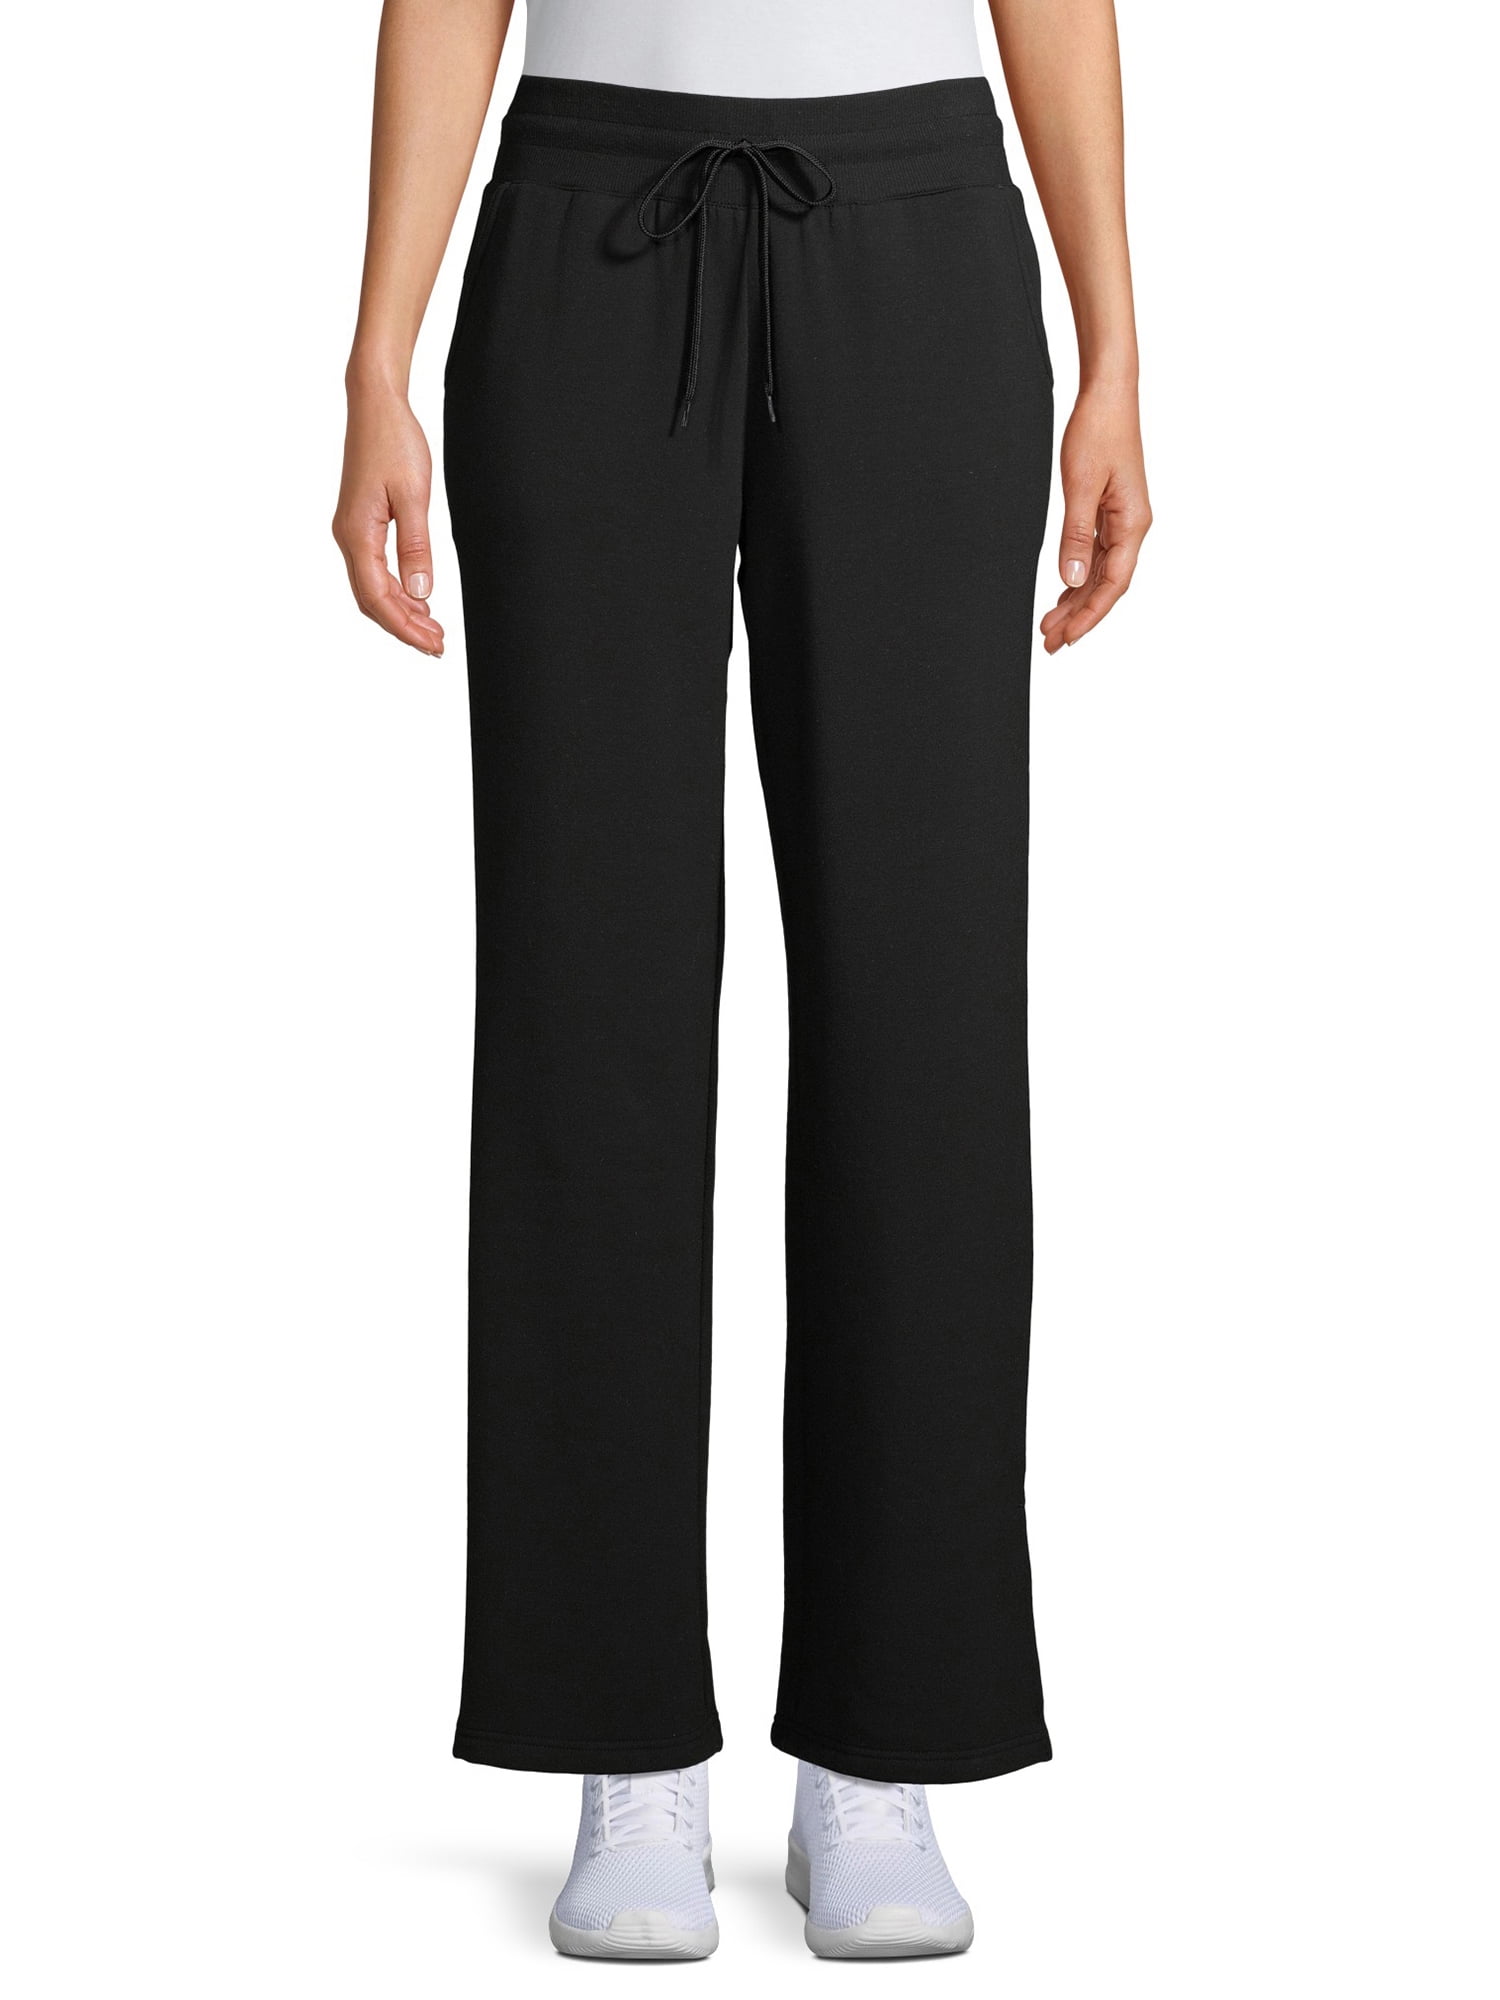 Athletic Works Women's Wide Leg Pants Available in Regular and Petite ...